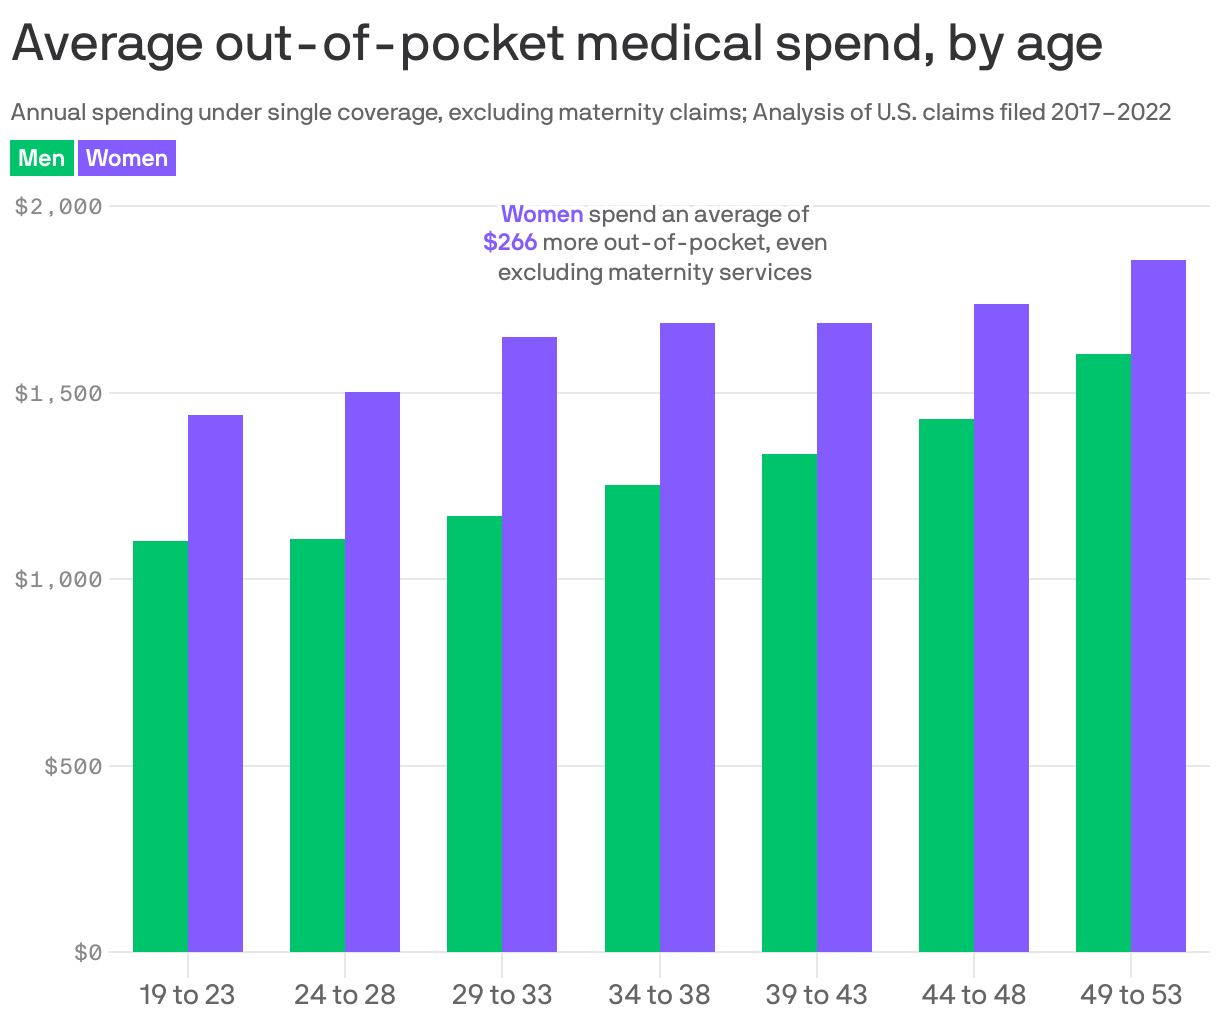 Average out-of-pocket medical spend, by age